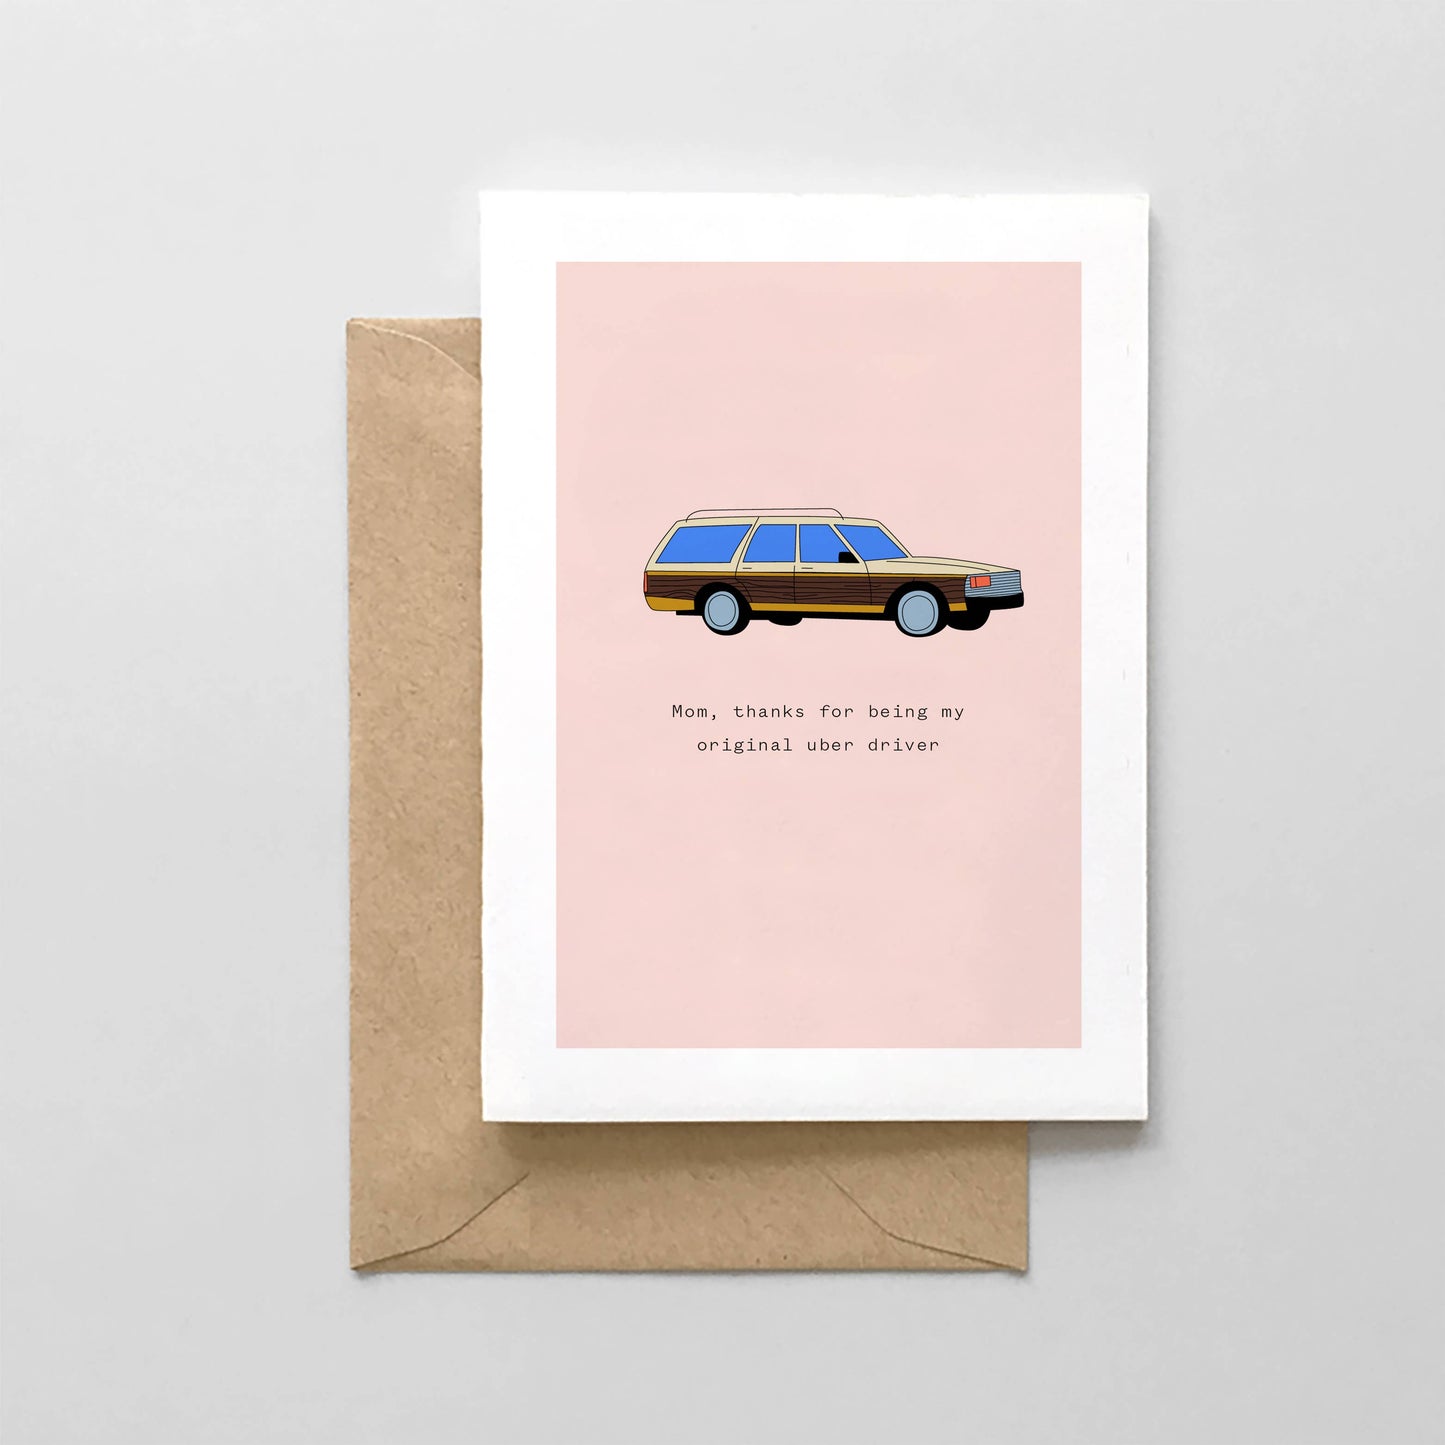 Spaghetti & Meatballs - Uber Driver - Mother's Day Card